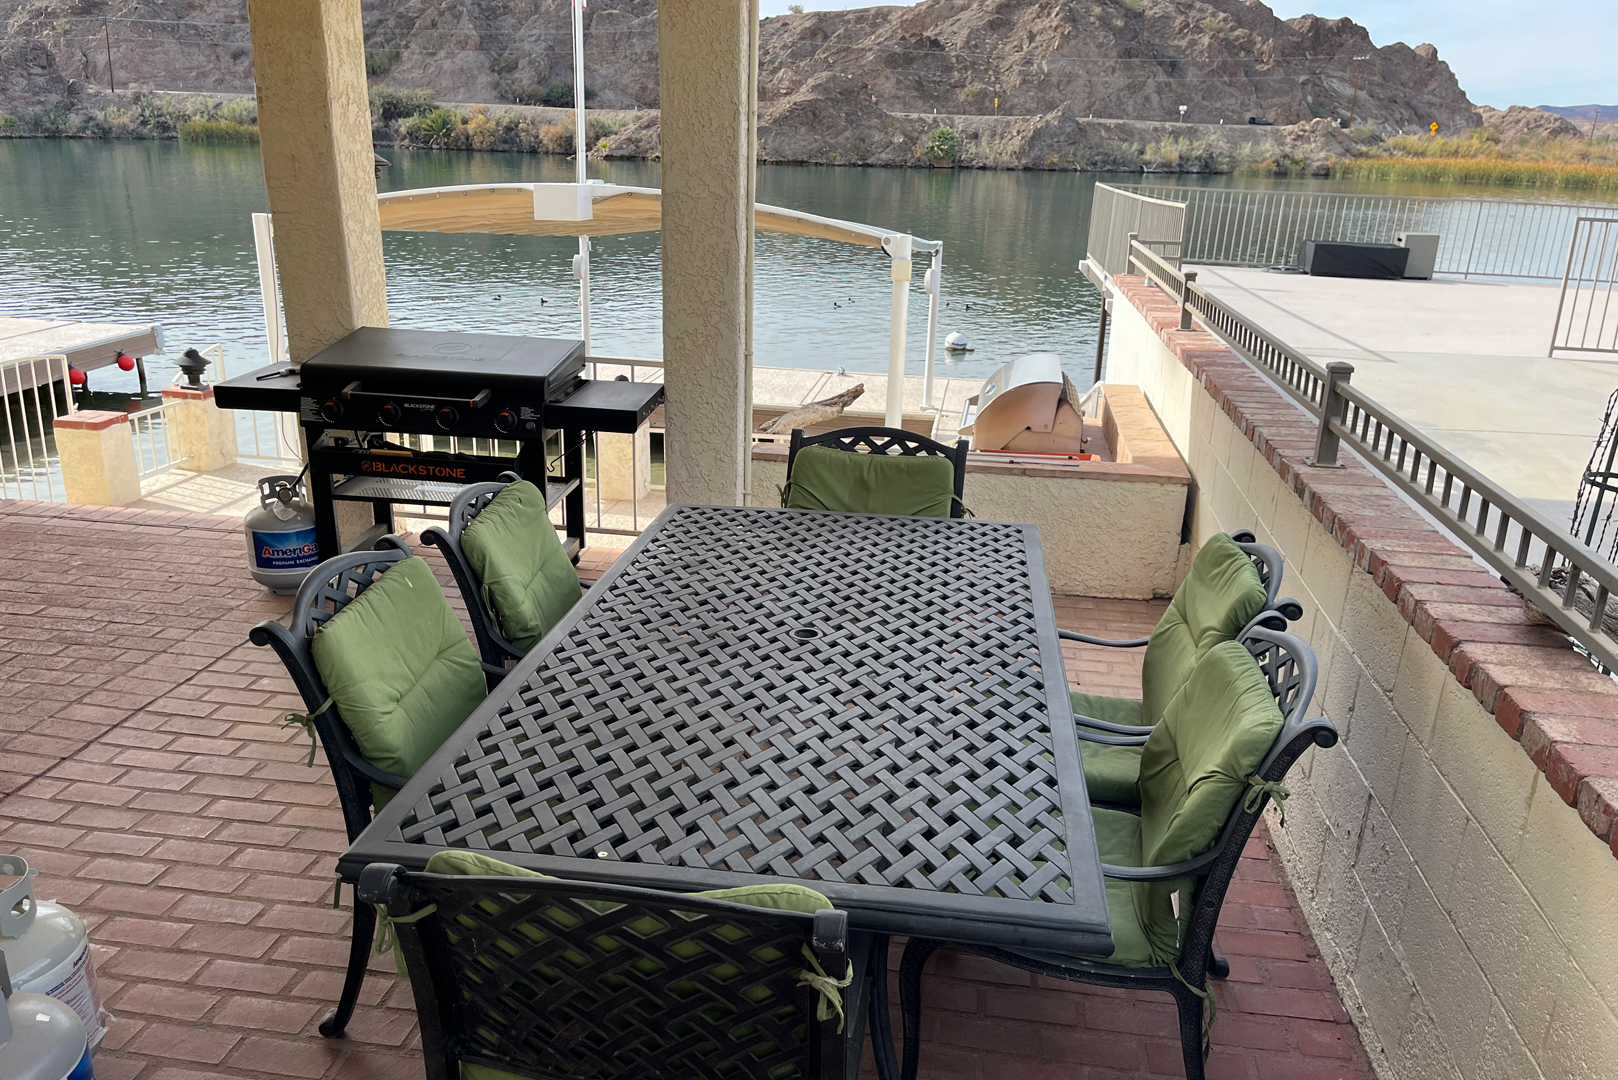 A view of the dining area of the river lanai